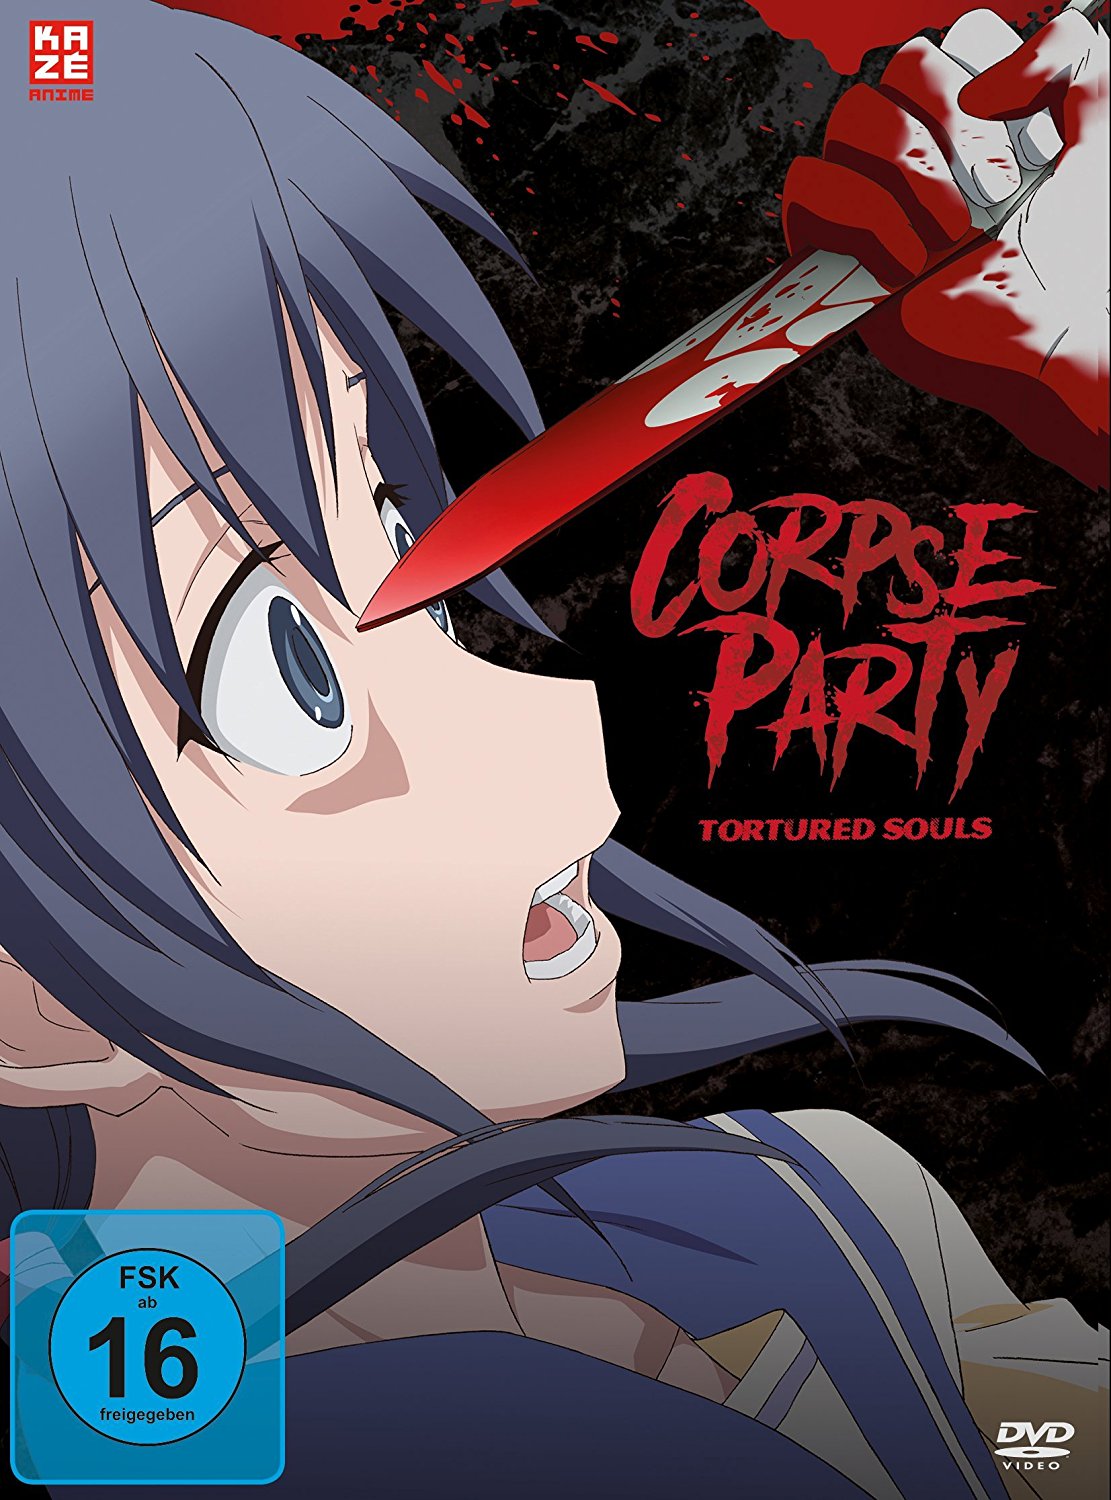 Corpse Party: Tortured Soul - OVA's